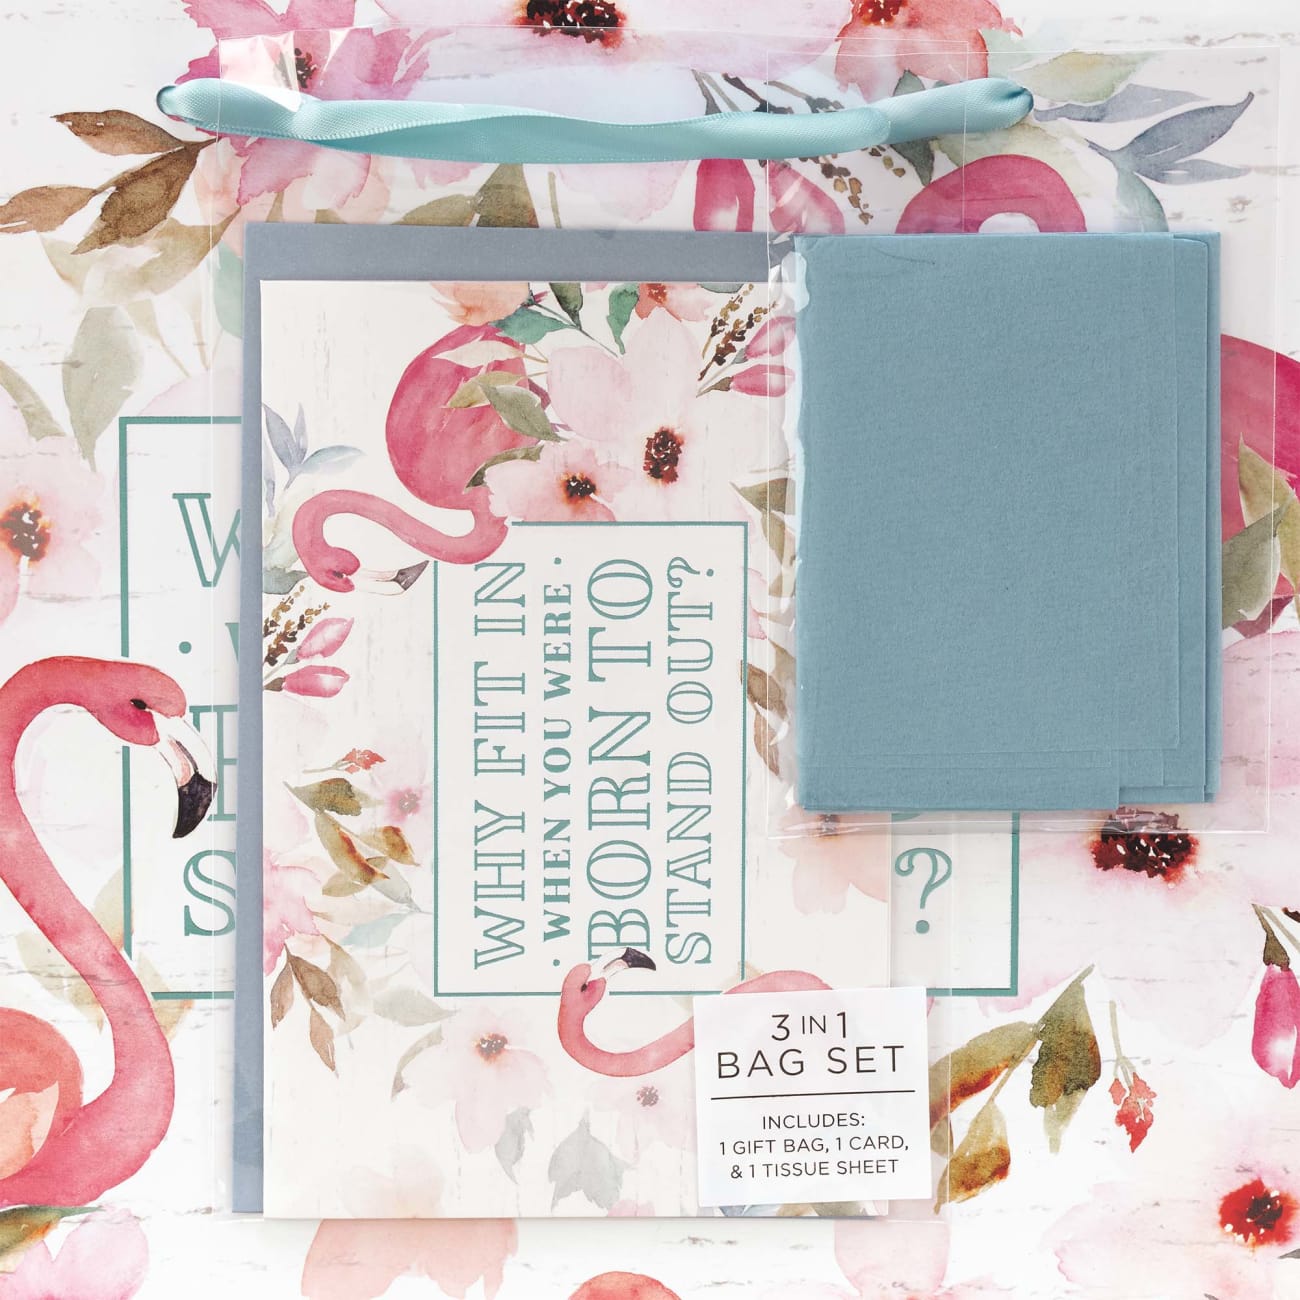 Gift Bag With Card: Why Fit In, Flamingoes, Light Blue Stationery